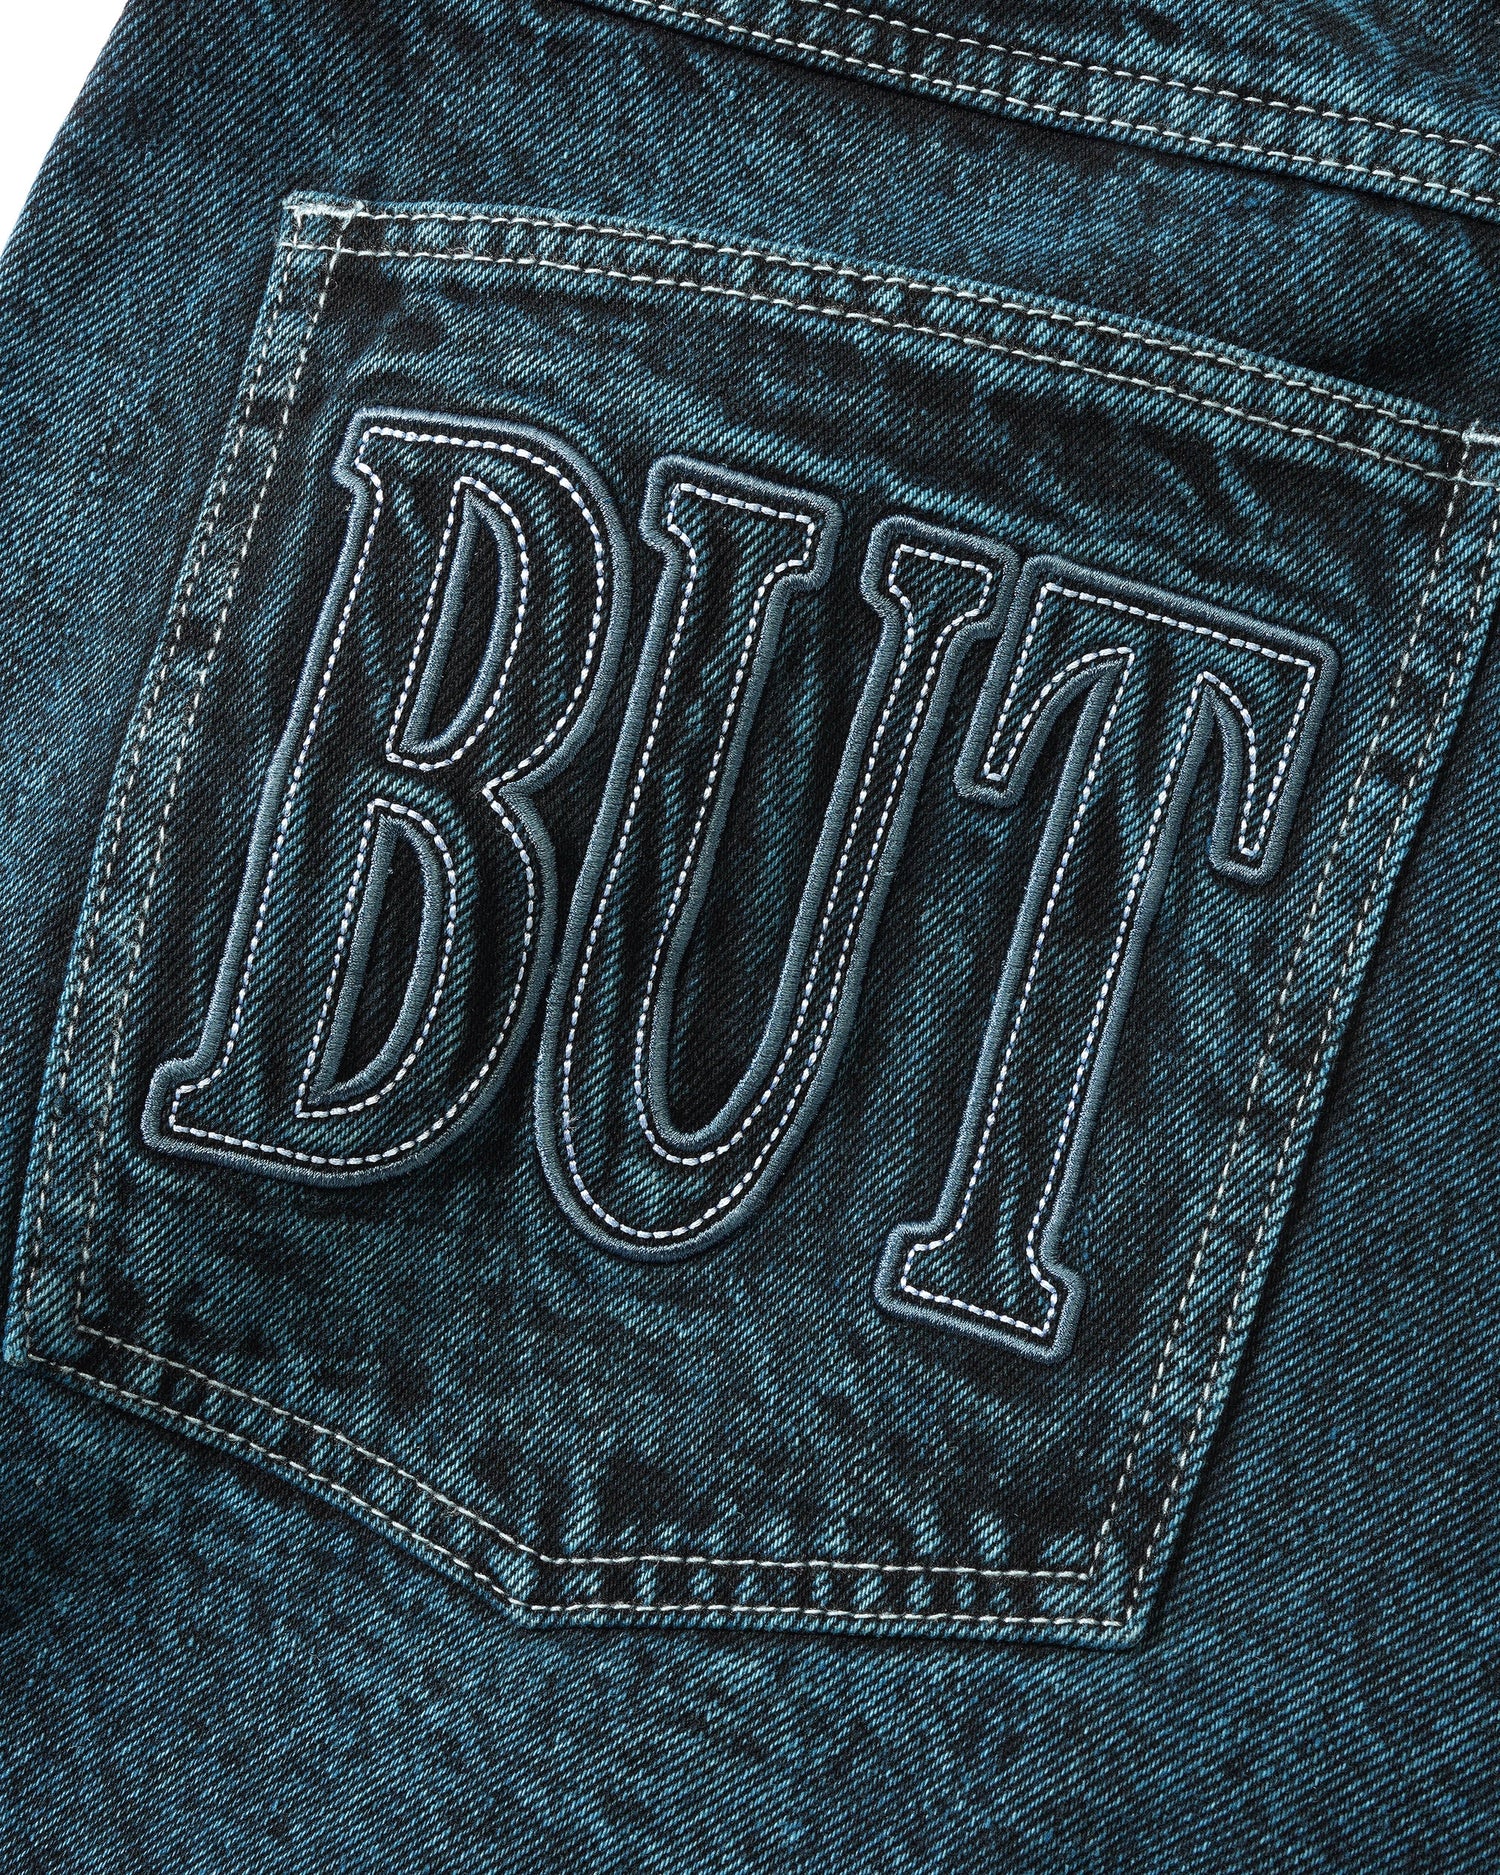 What are the best brands of raw-denim jeans - Blue 17 Vintage Clothing